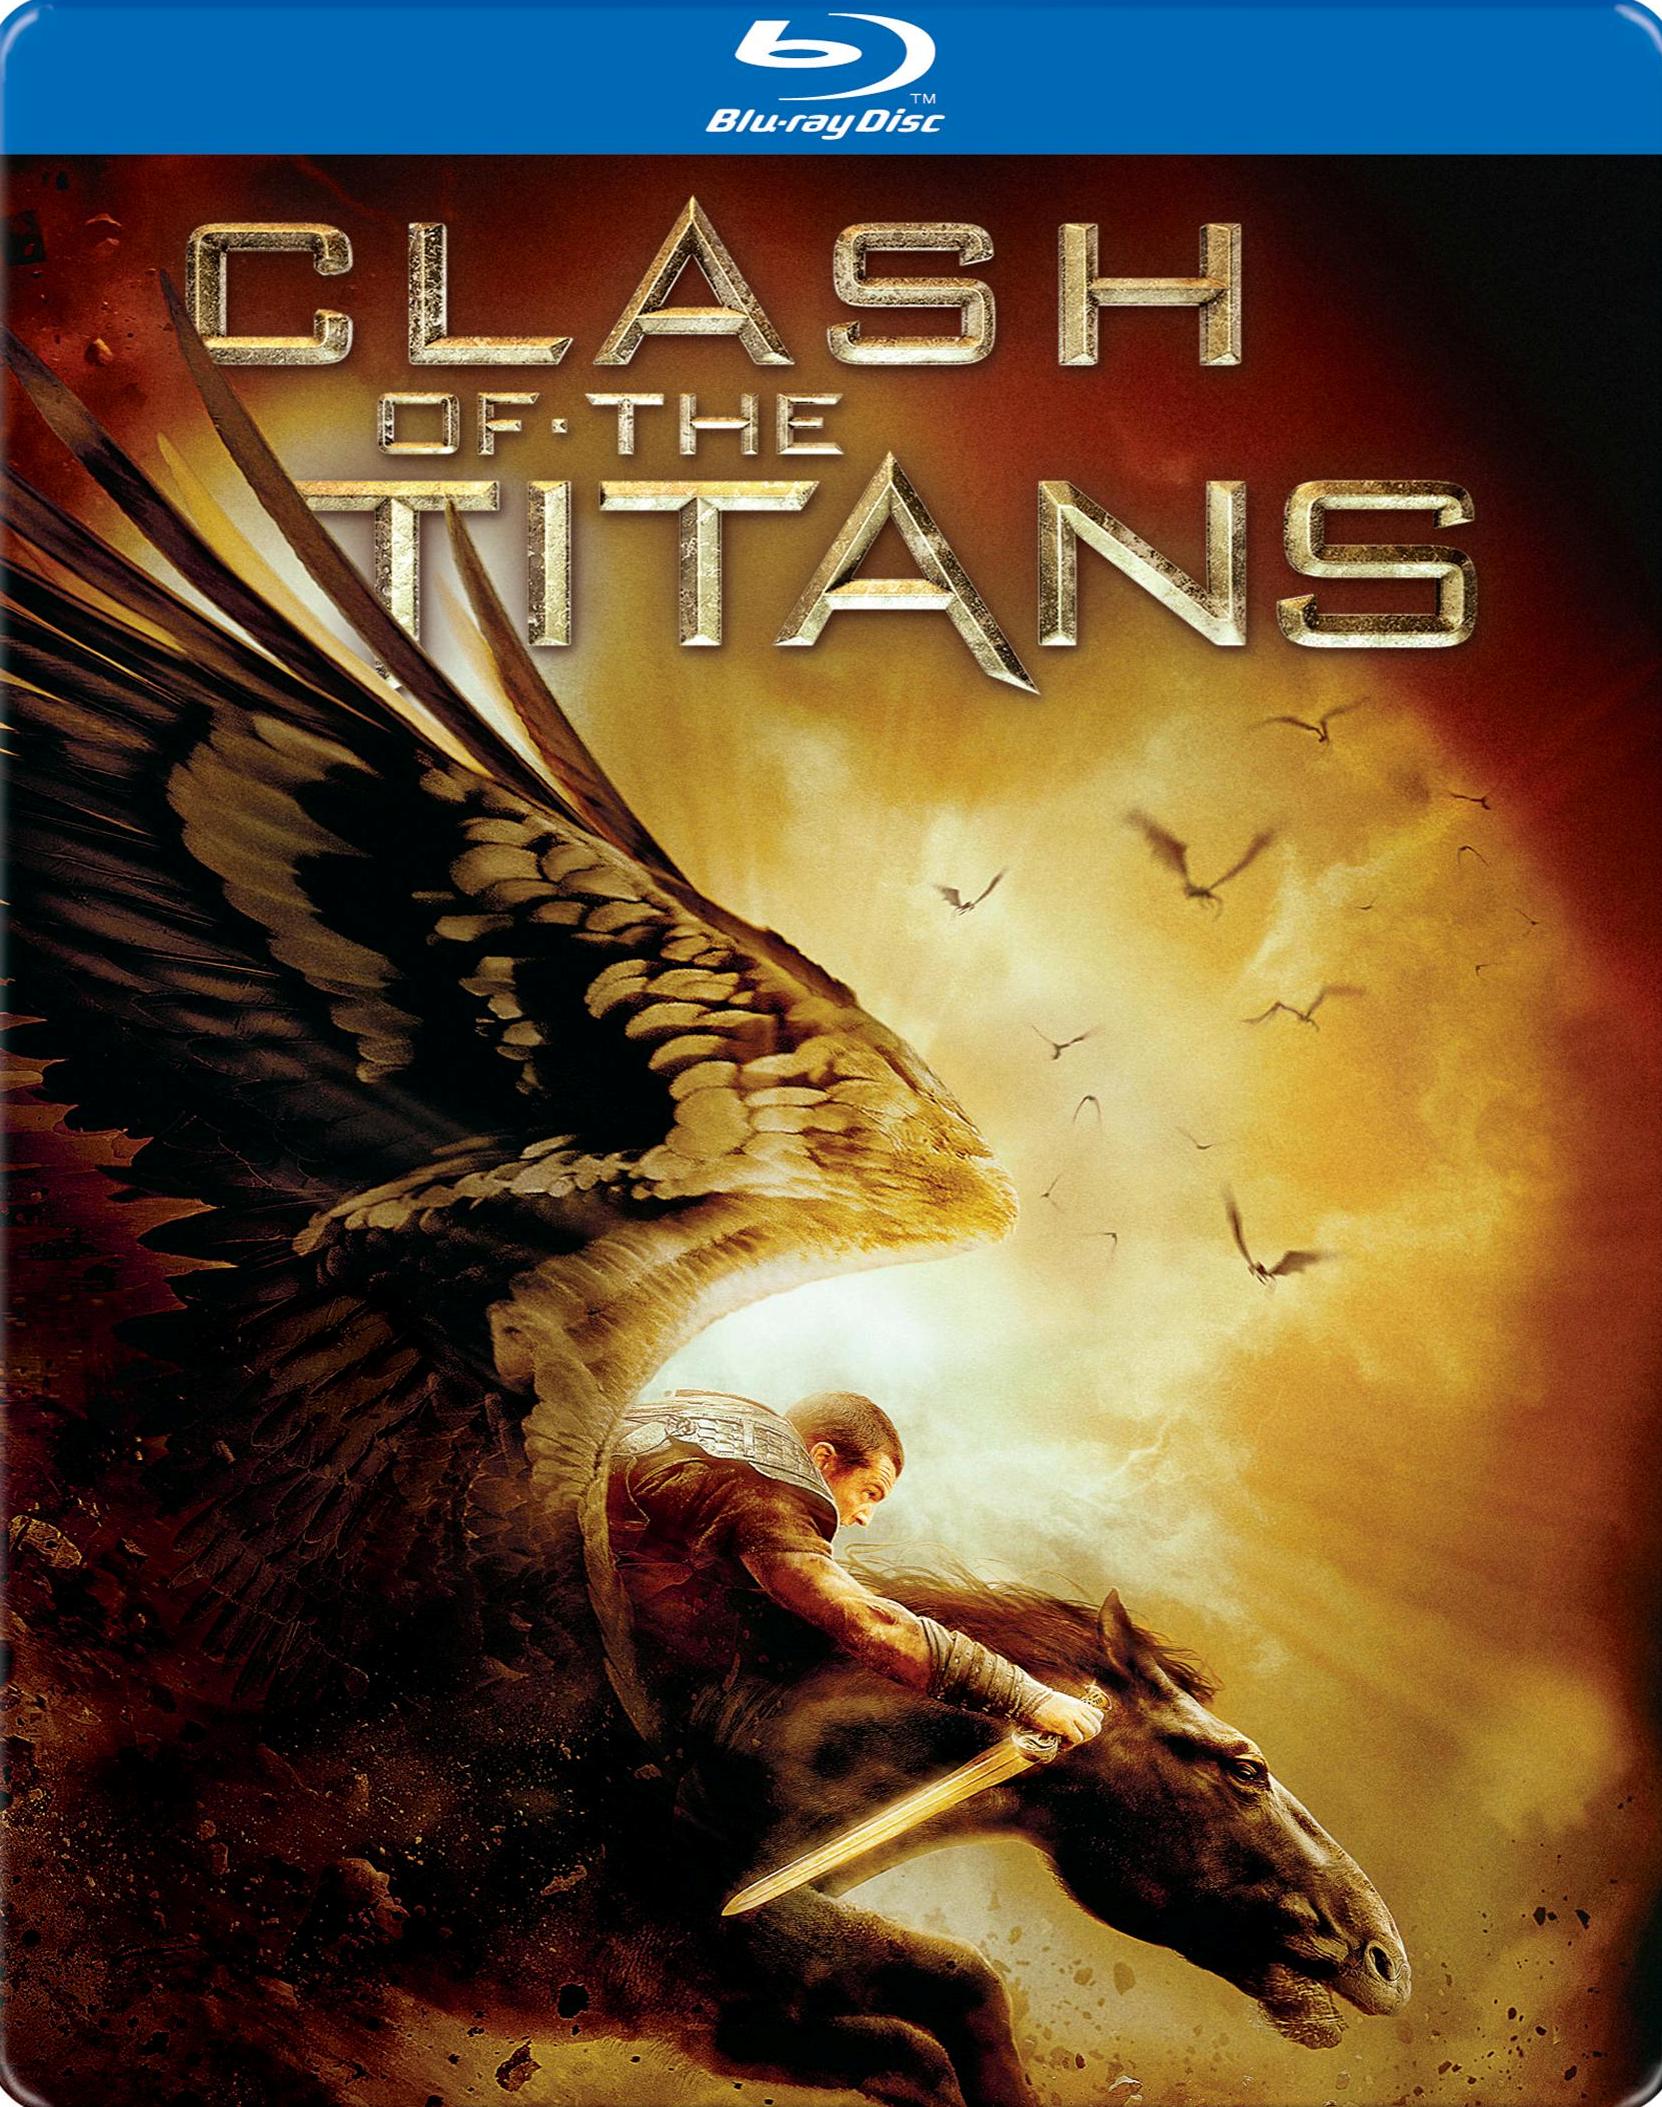 Best Buy: Clash of the Titans [2 Discs] [Blu-ray/DVD] [2010]